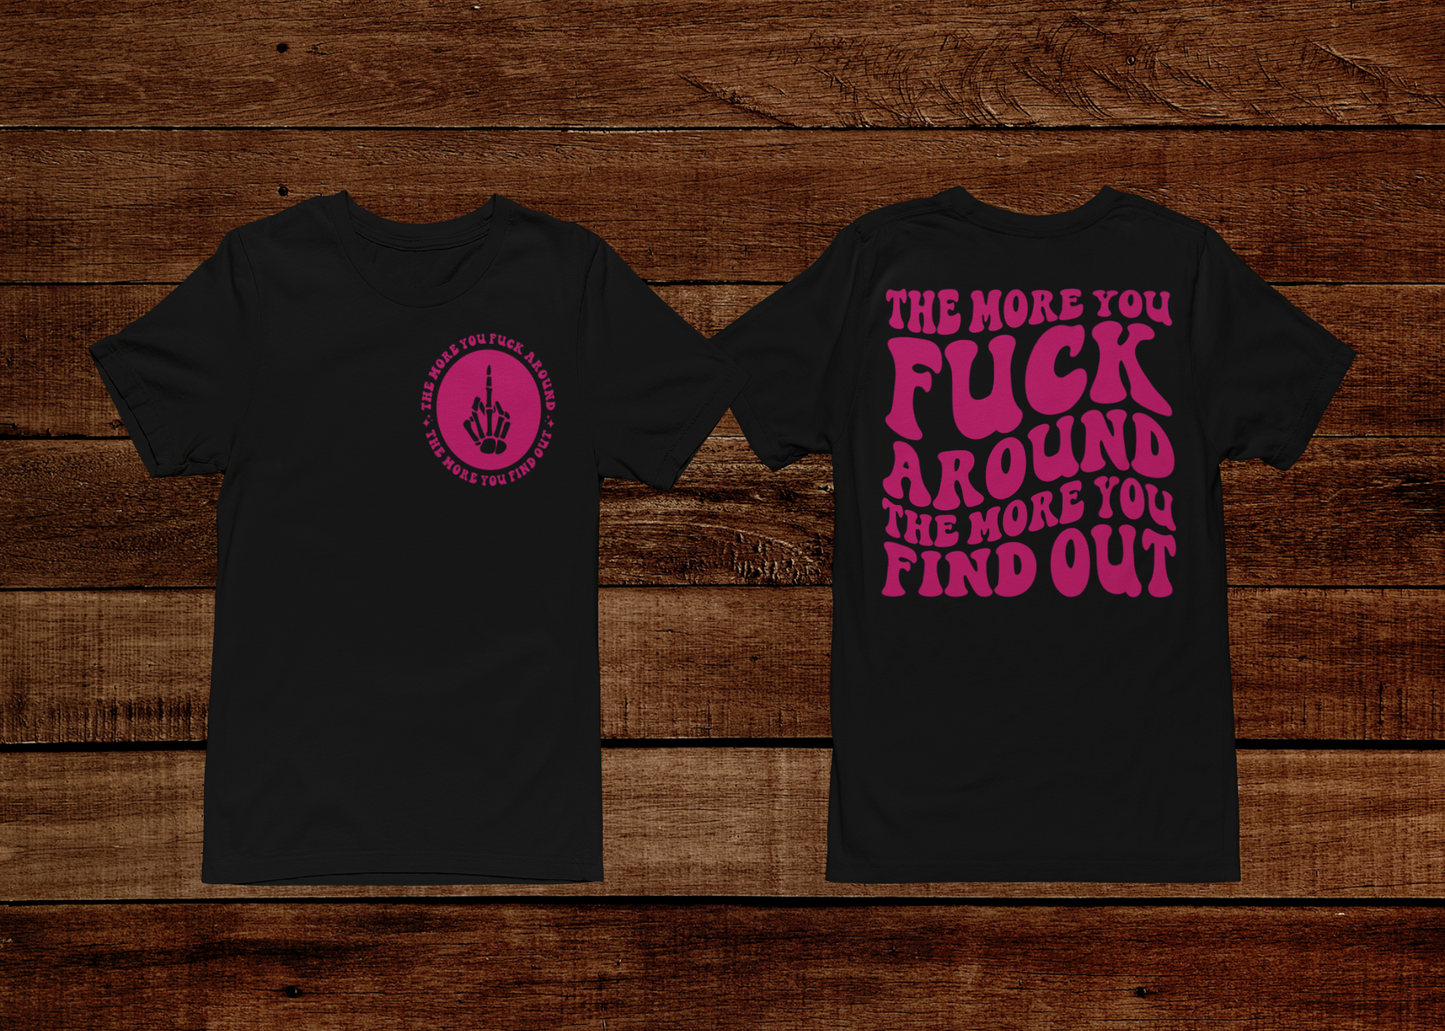 The More You Fuck Around The More You Find Out T-Shirt